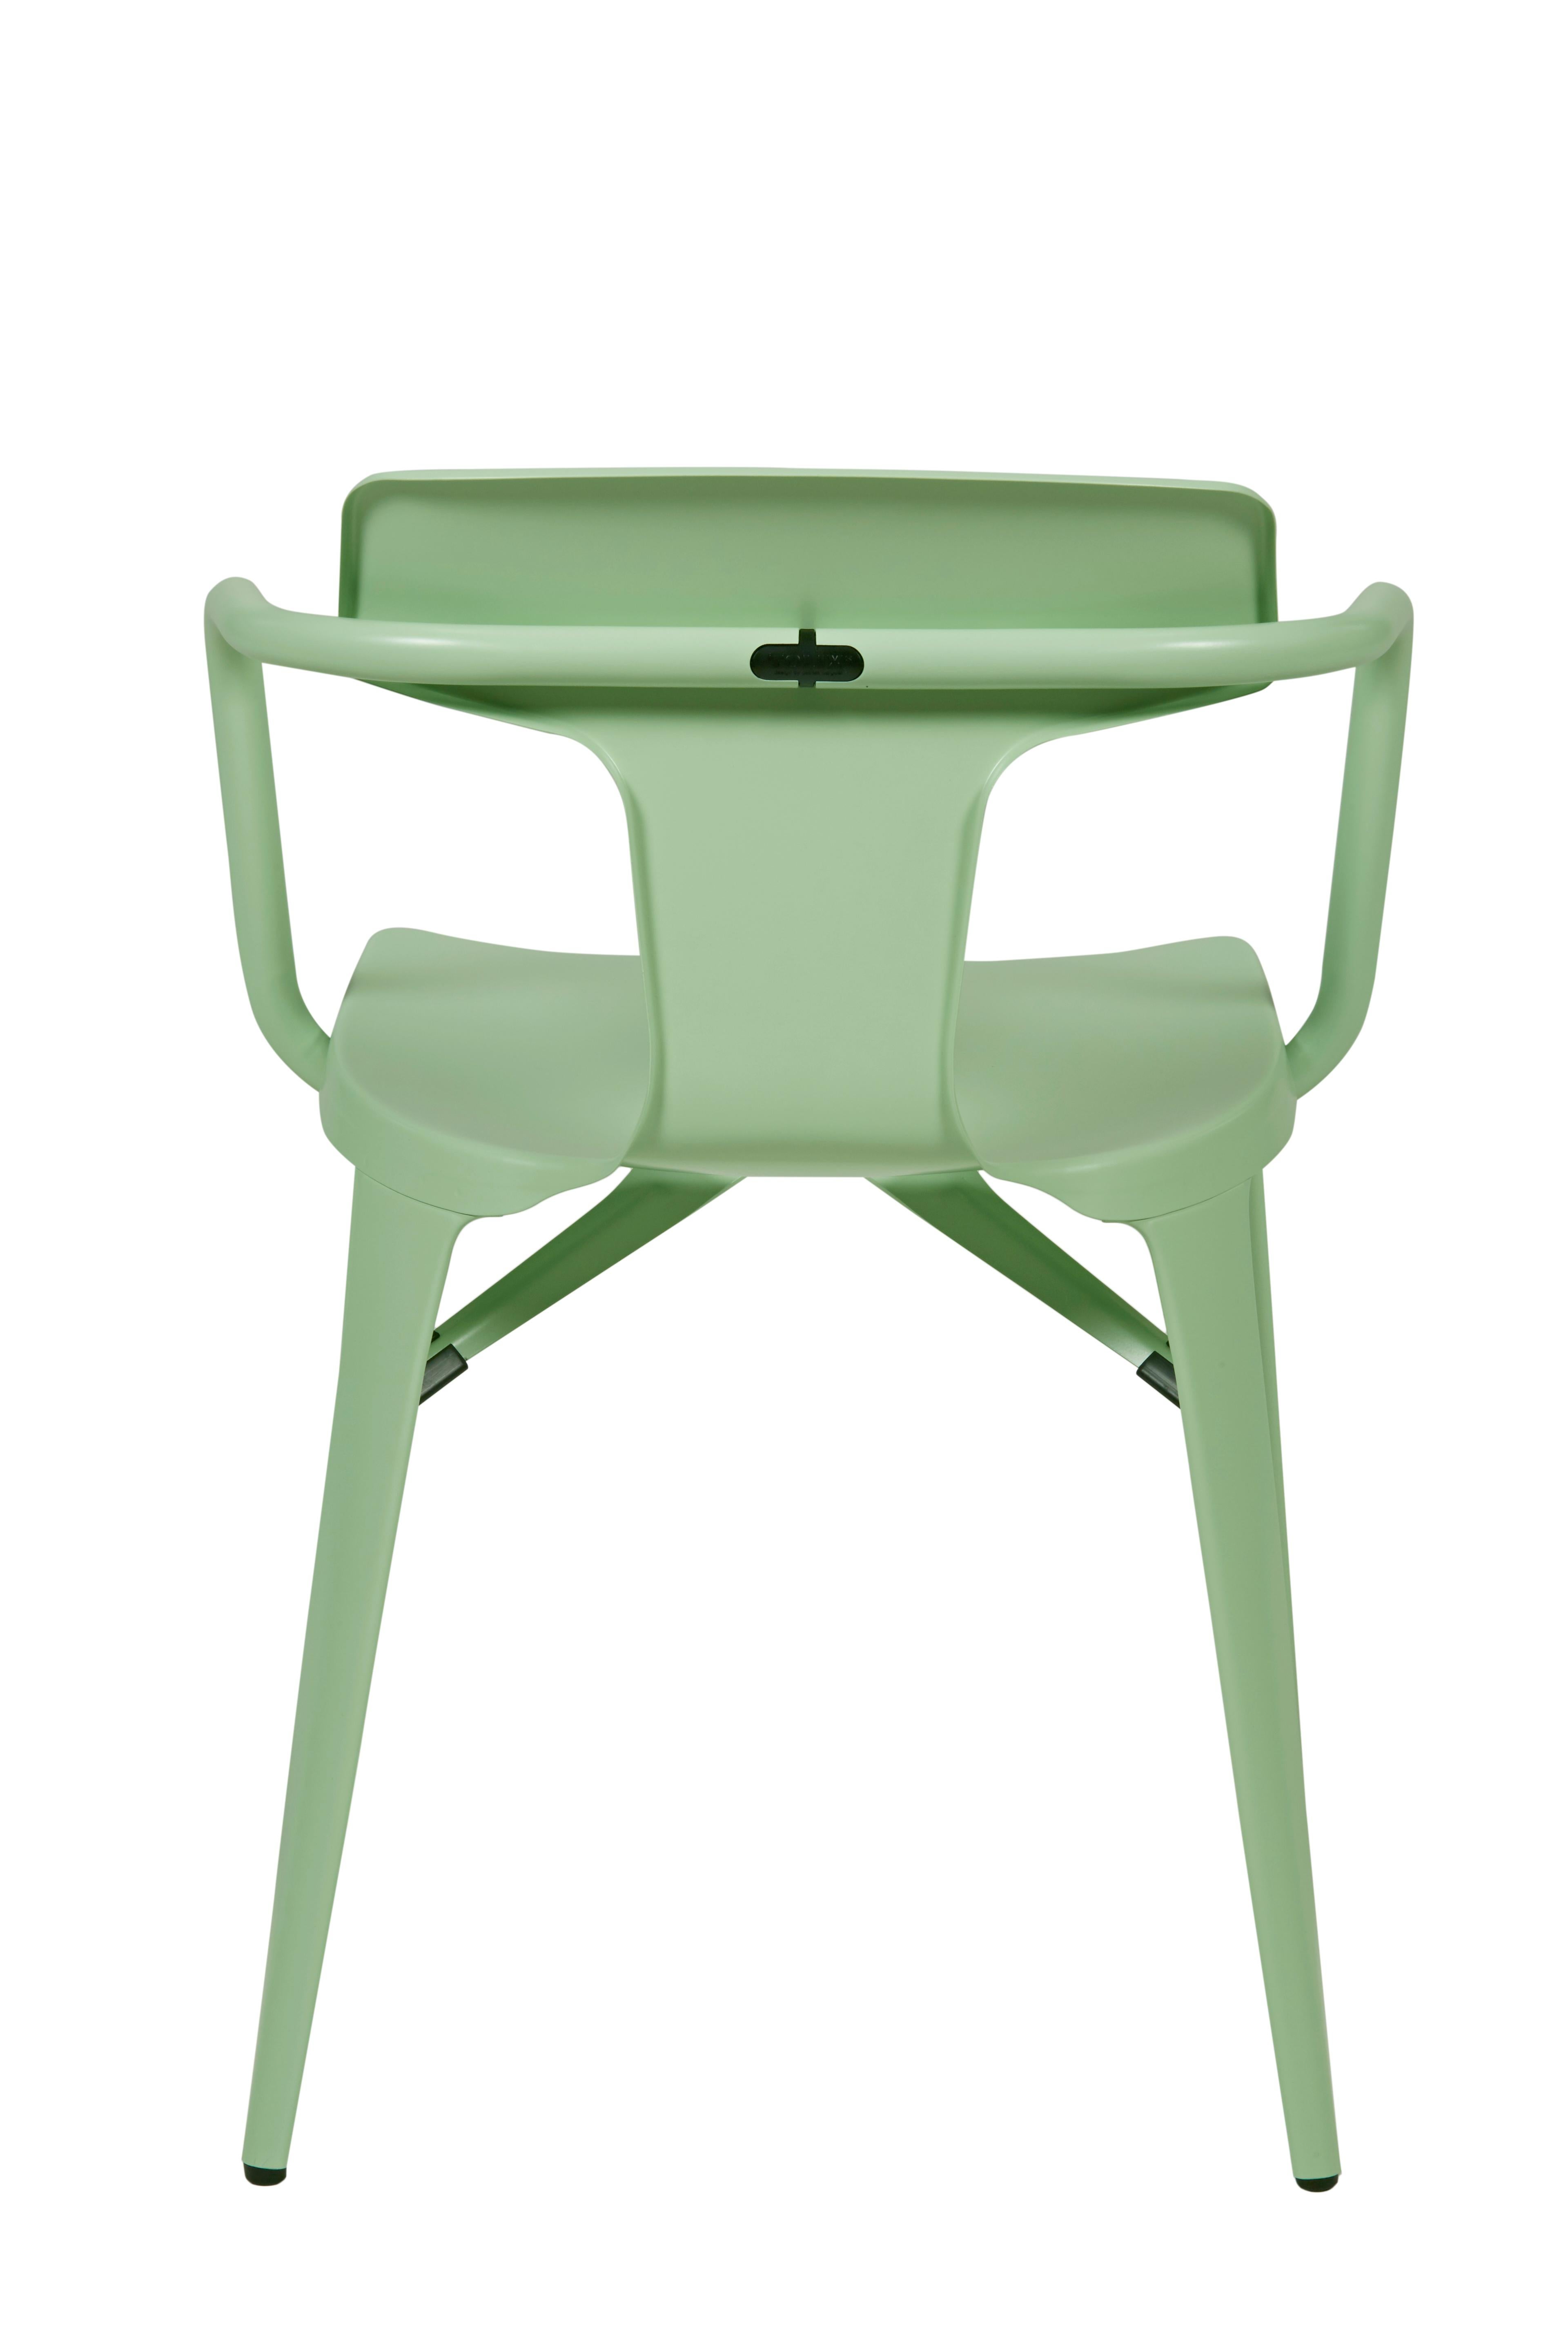 Im Angebot: T14 Chair in Pop Colors by Patrick Norguet and Tolix, Green (Vert Anis) 2